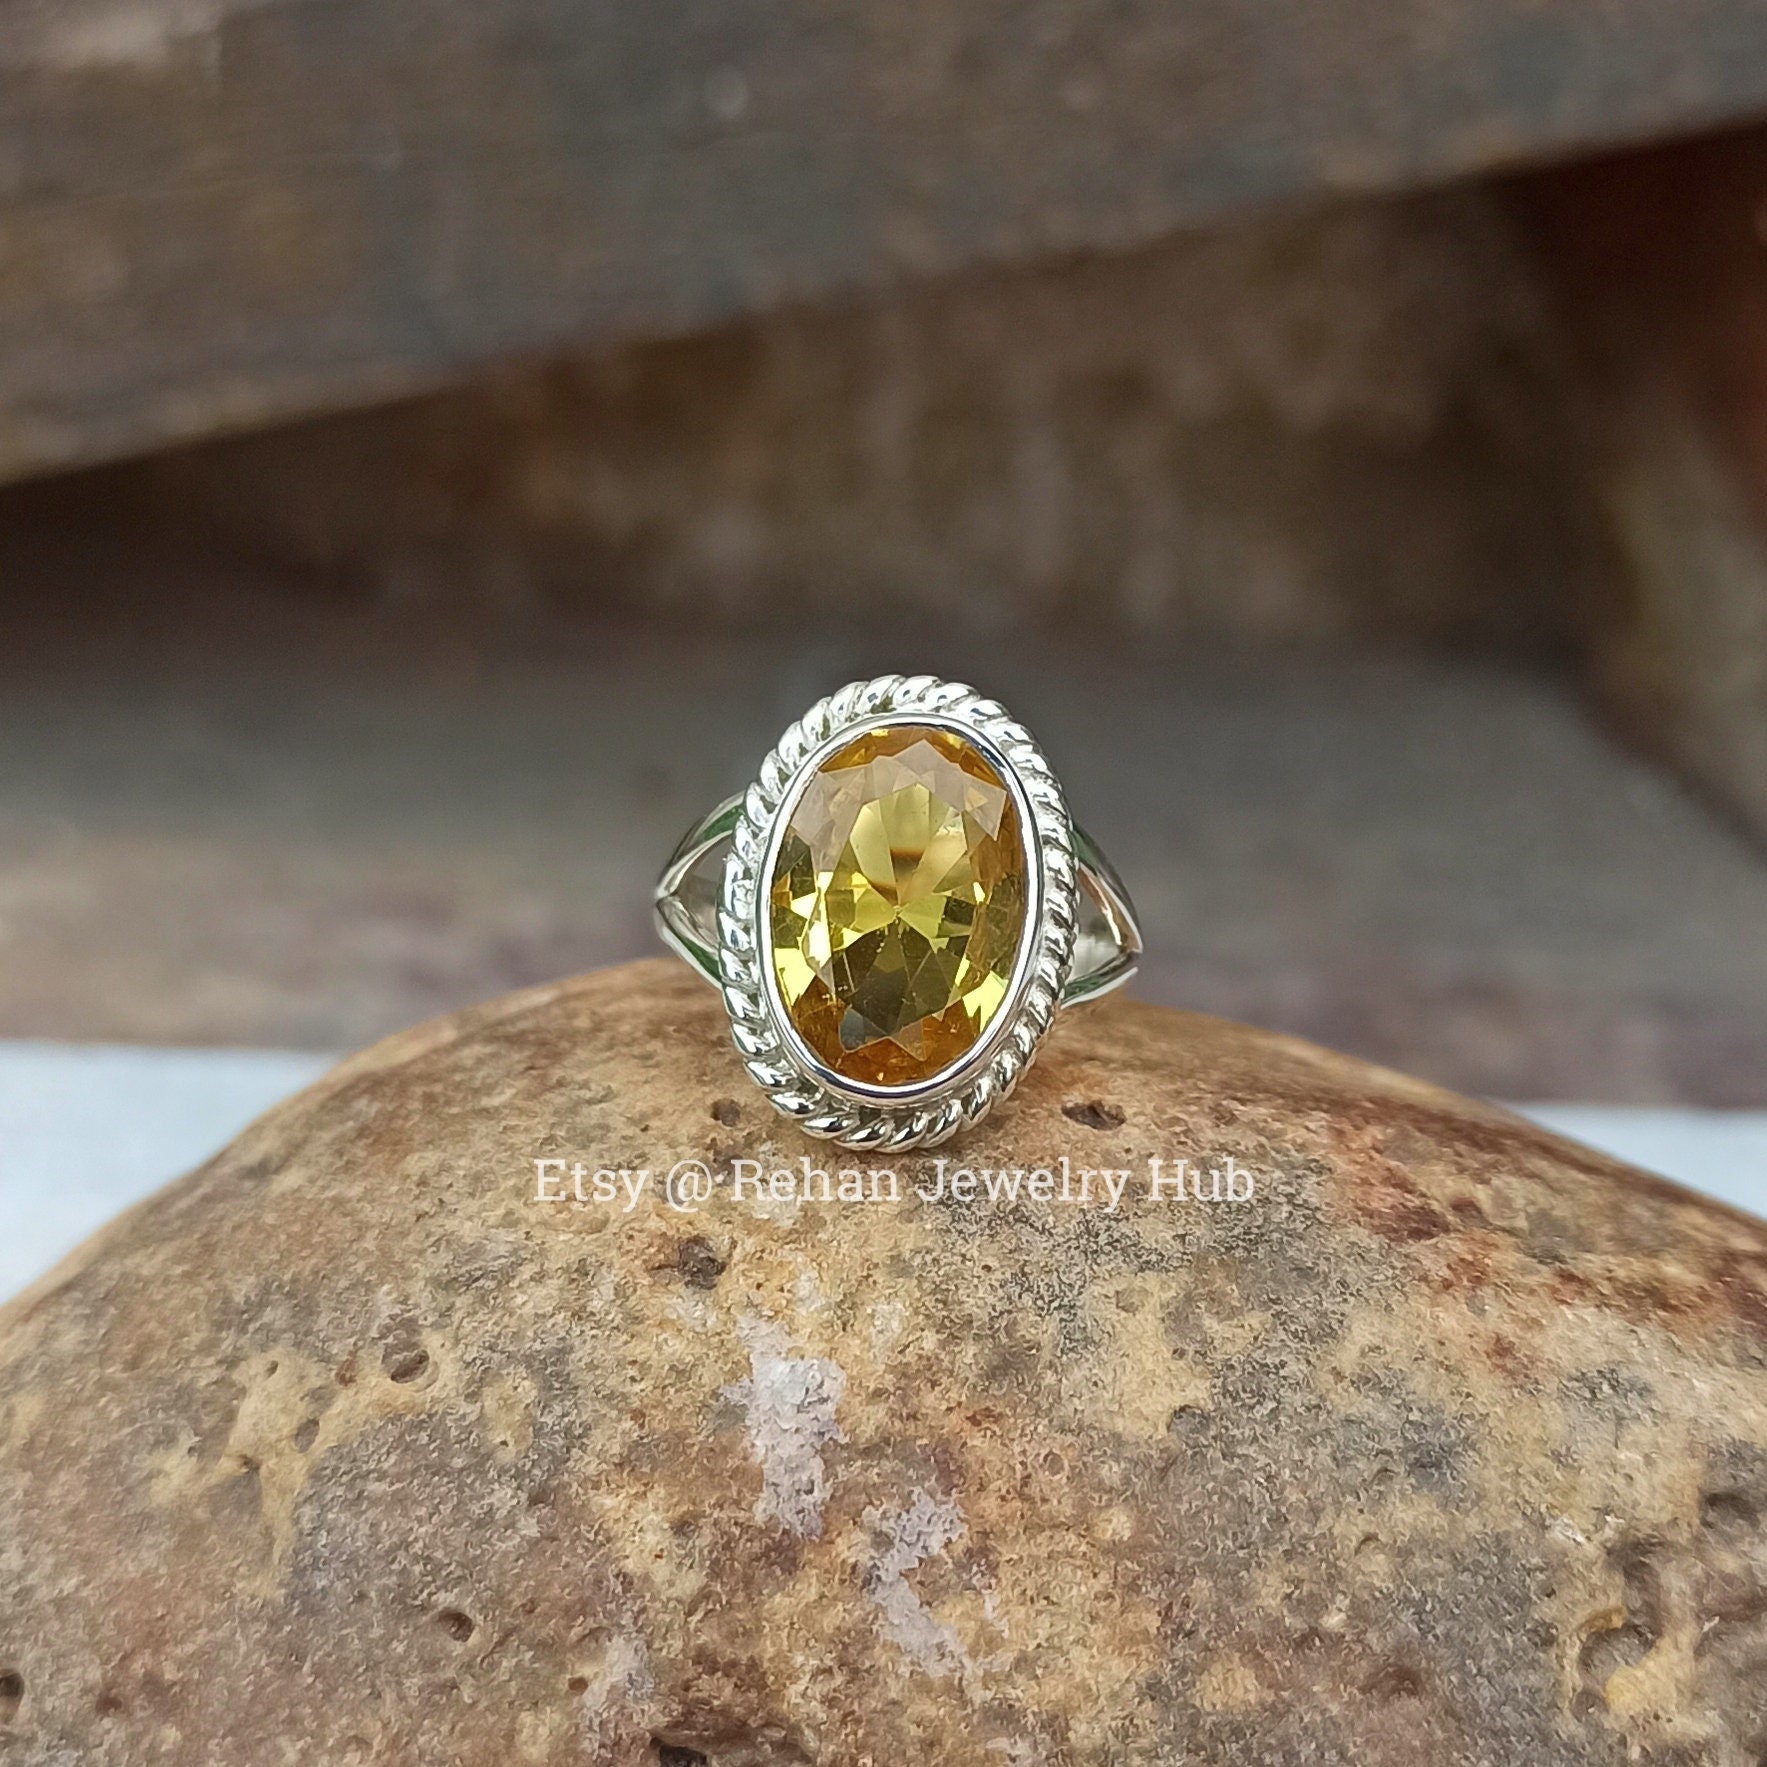 Buy SIDHARTH GEMS 7.25 Ratti 6.00 Carat Citrine Ring Sunela Certified  Natural Original Oval Cut Precious Gemstone Citrine Gold Plated Adjustable  Ring Size 16-32 at Amazon.in